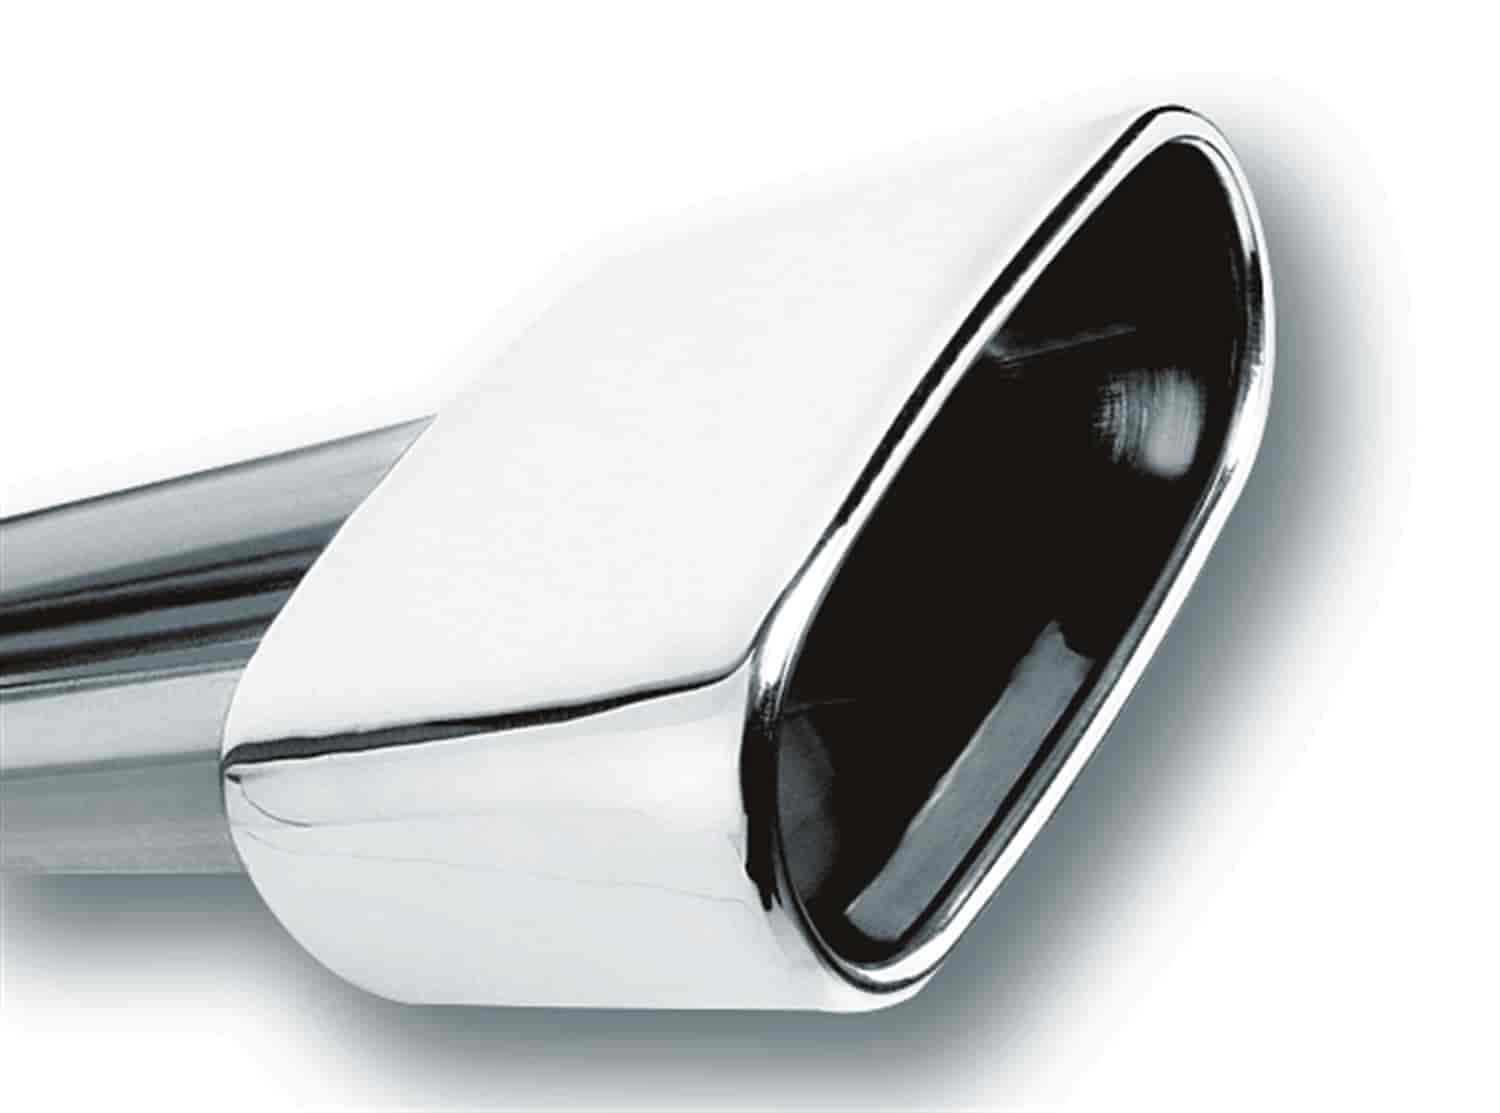 Stainless Steel Exhaust Tip Outlet Size: 3" x 6.69"